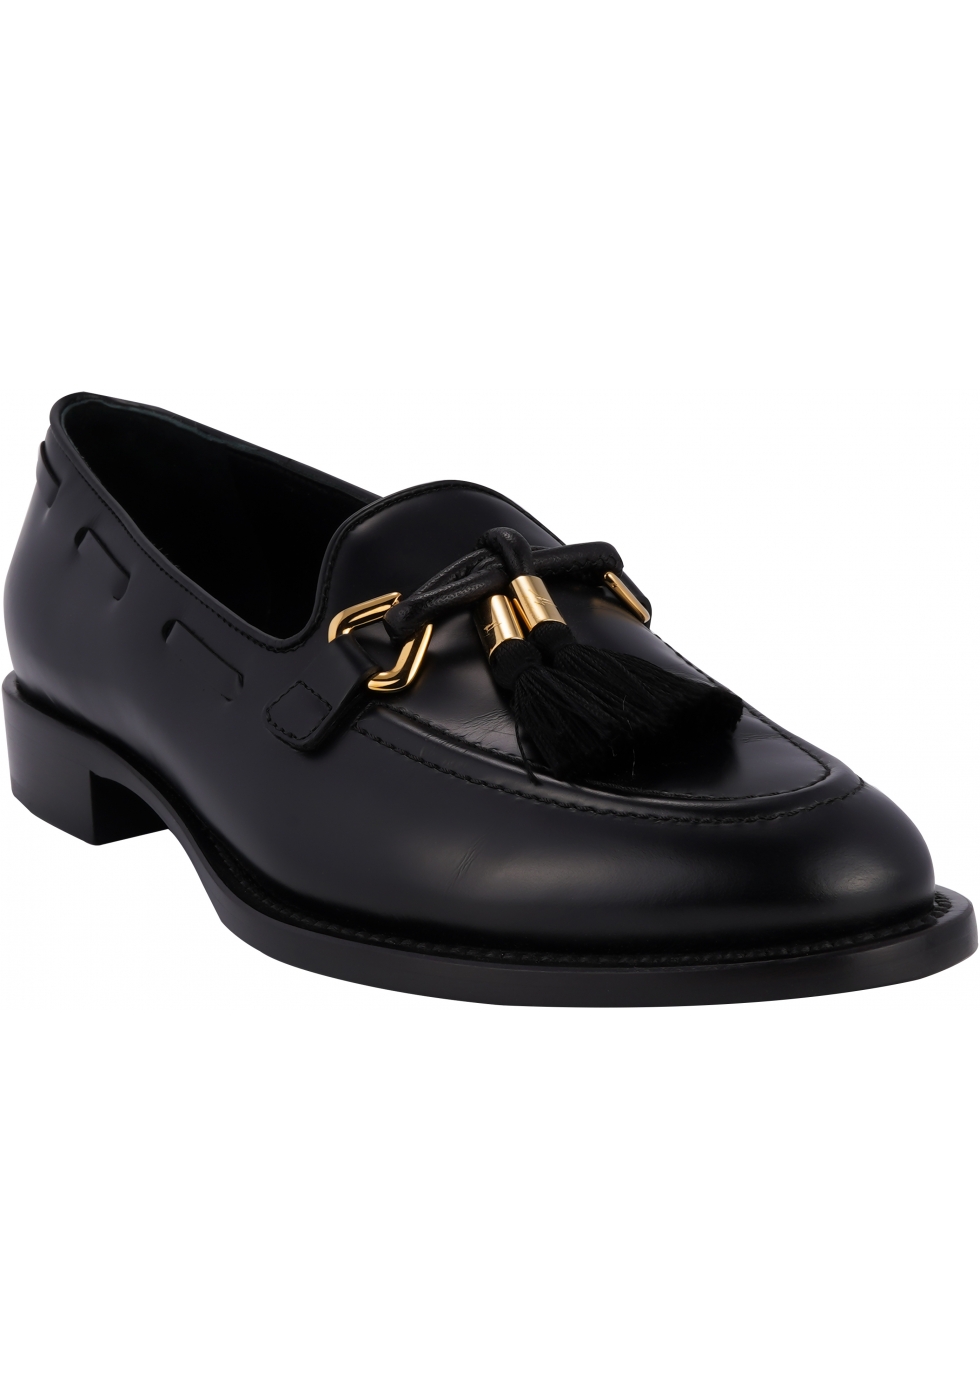 Giuseppe Zanotti Women's slip-on loafers shoes in black leather with ...